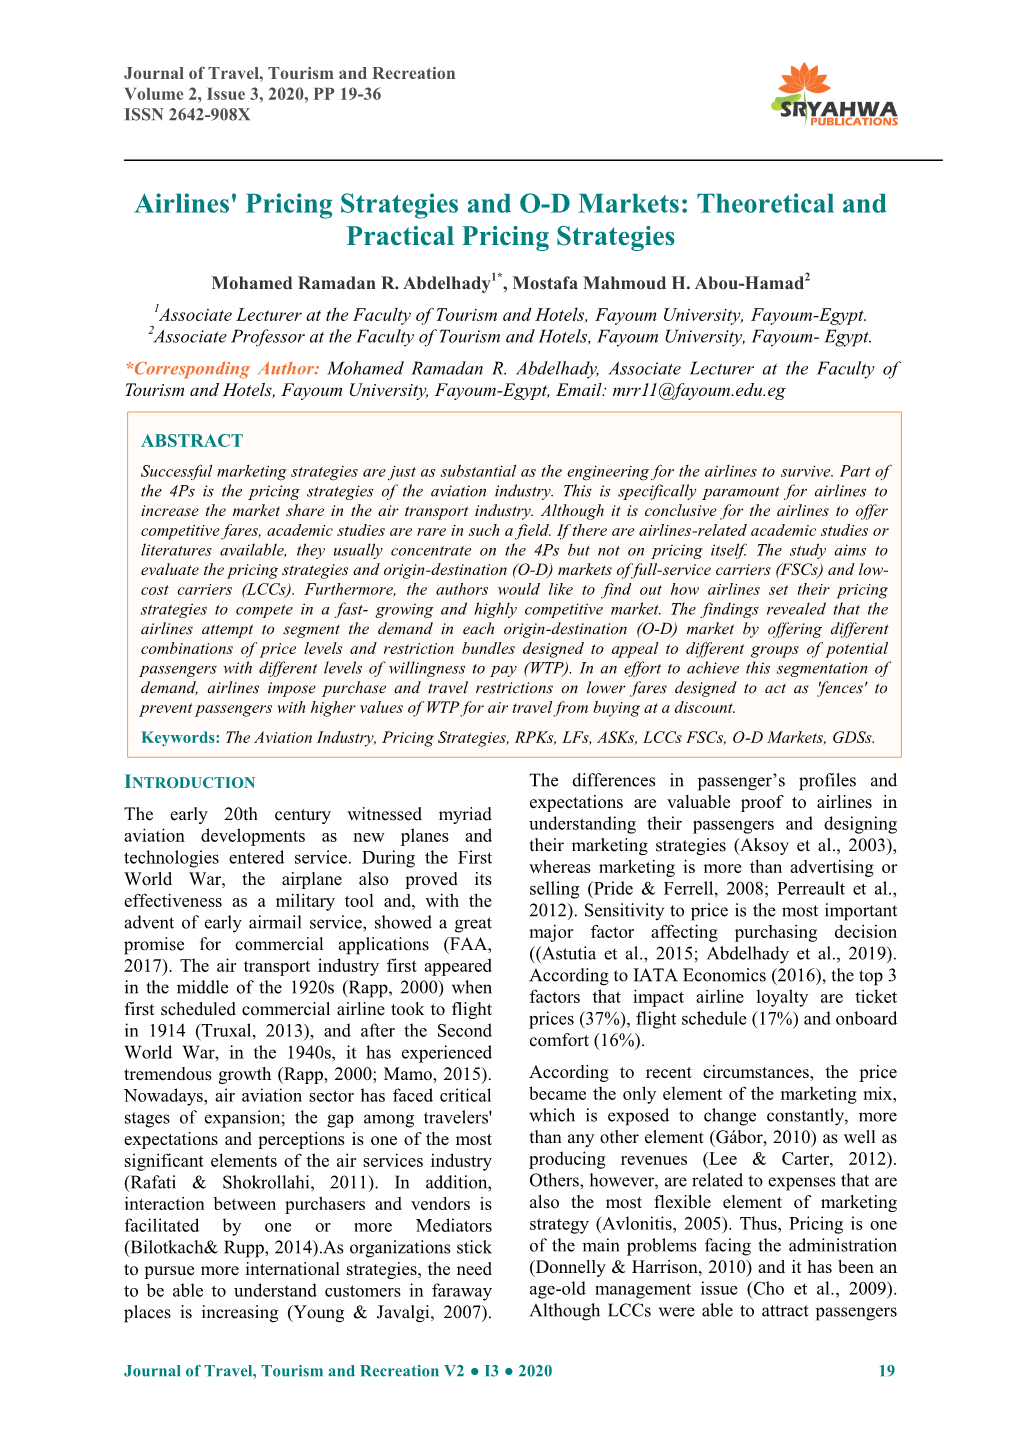 Airlines' Pricing Strategies and OD Markets